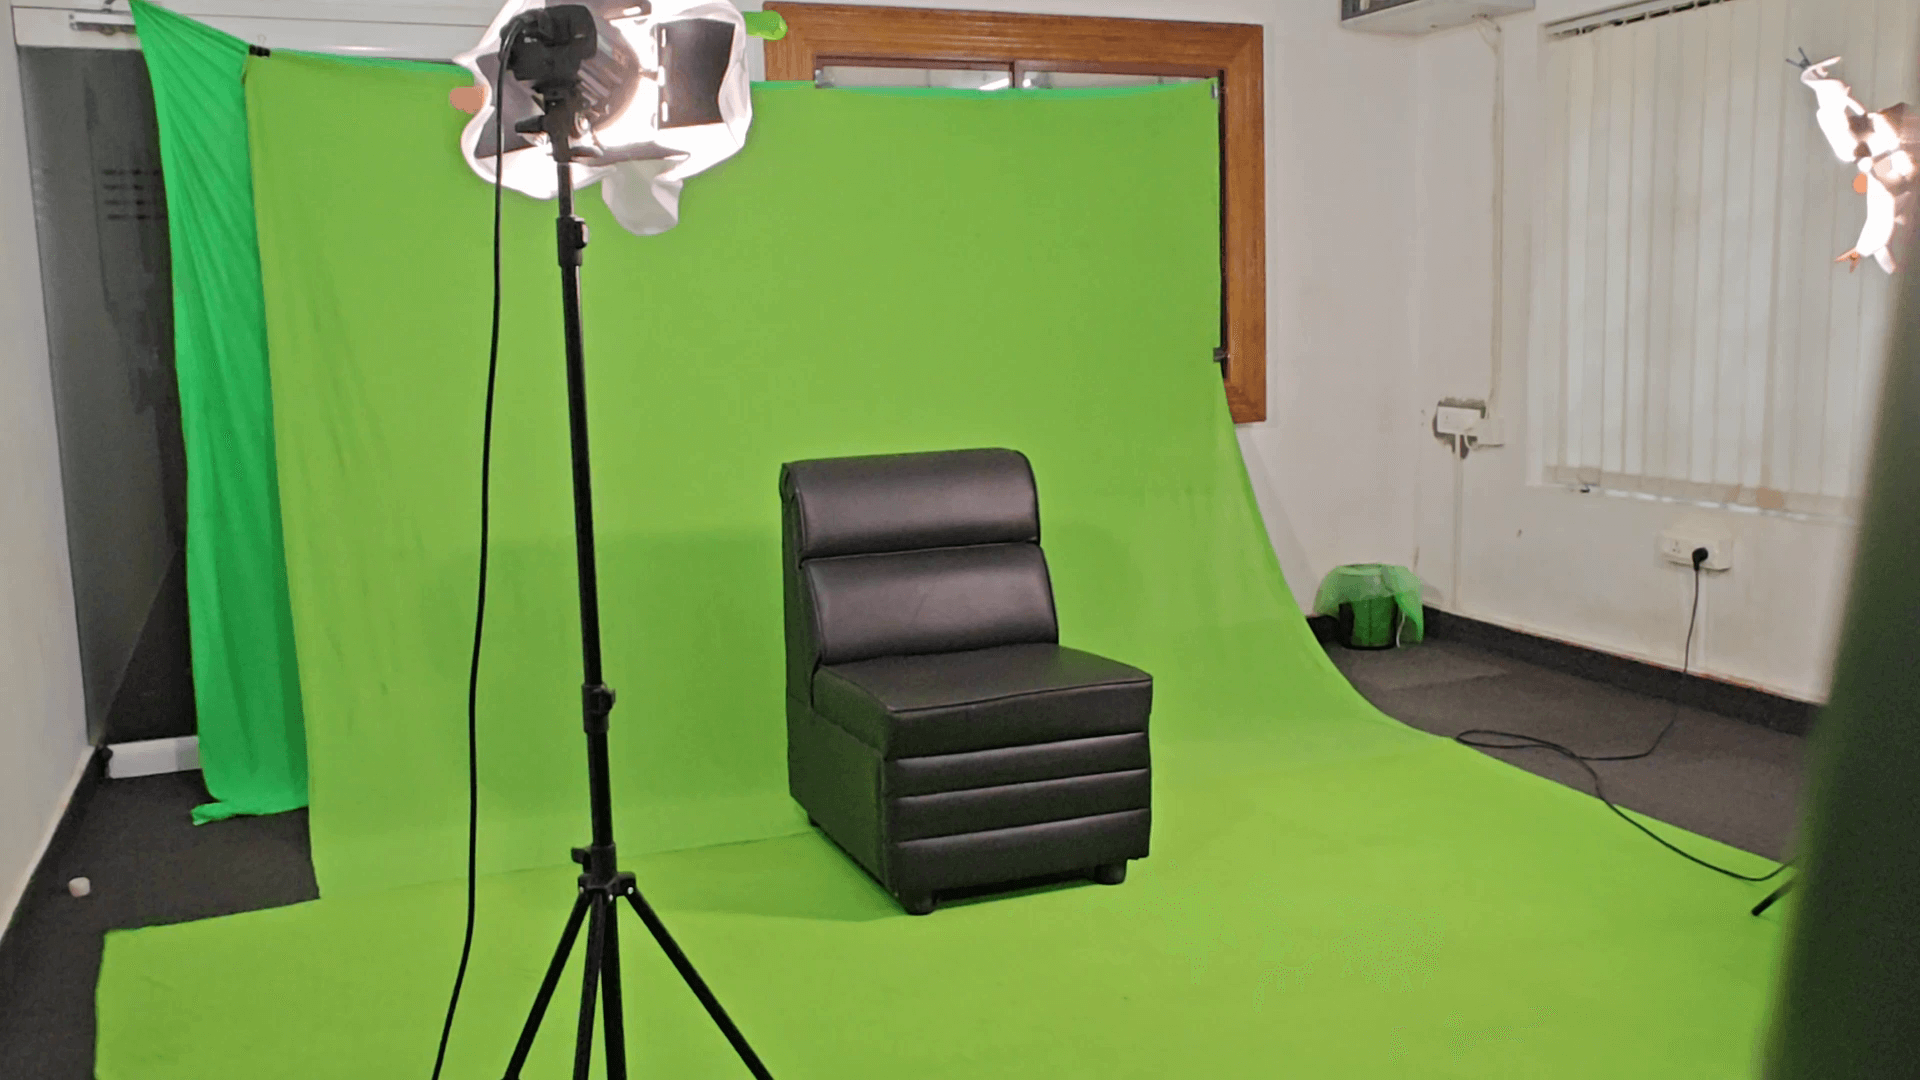 Photorealistic video production - Solutions & Methodology